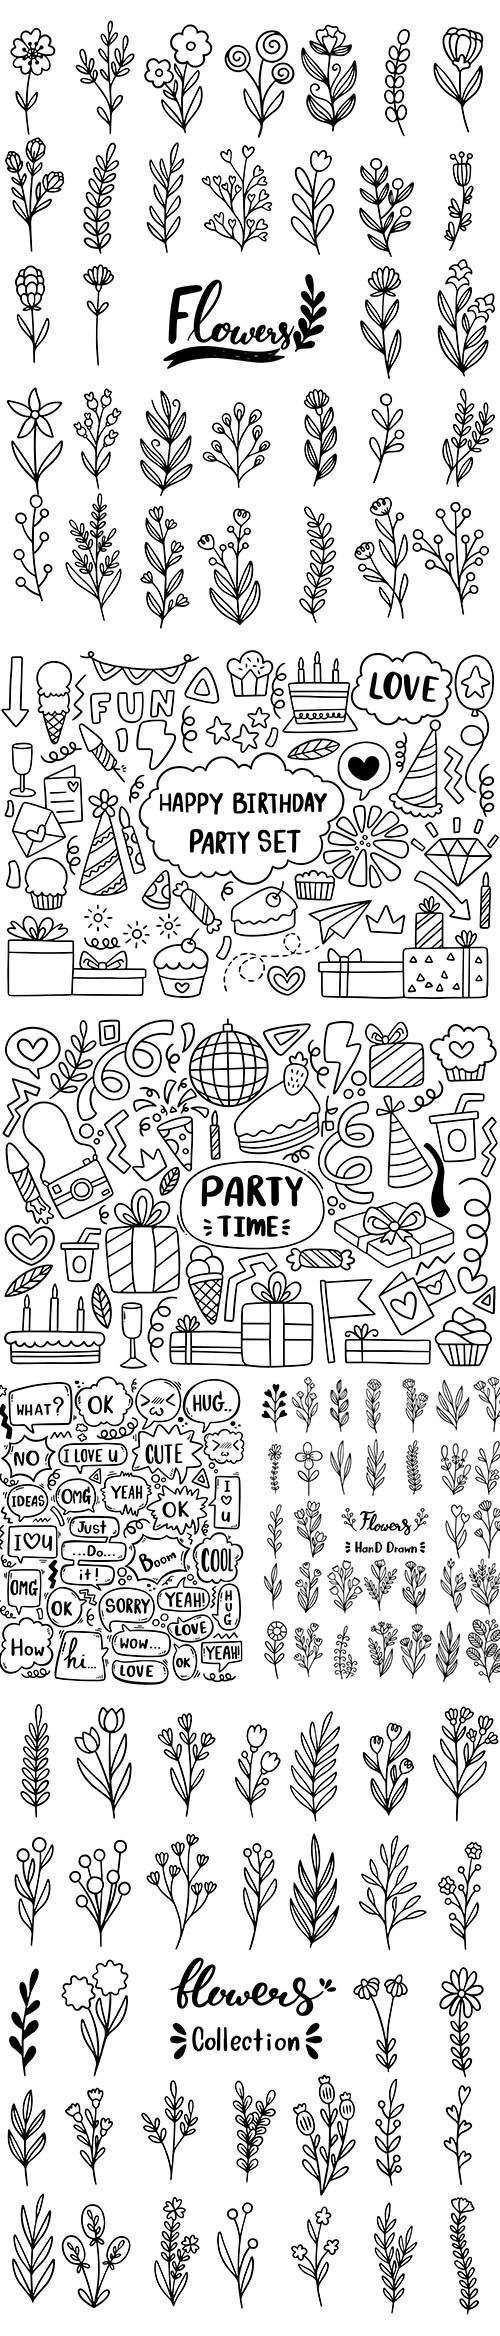 Hand drawn party doodle cute speech bubble eith text and flowers